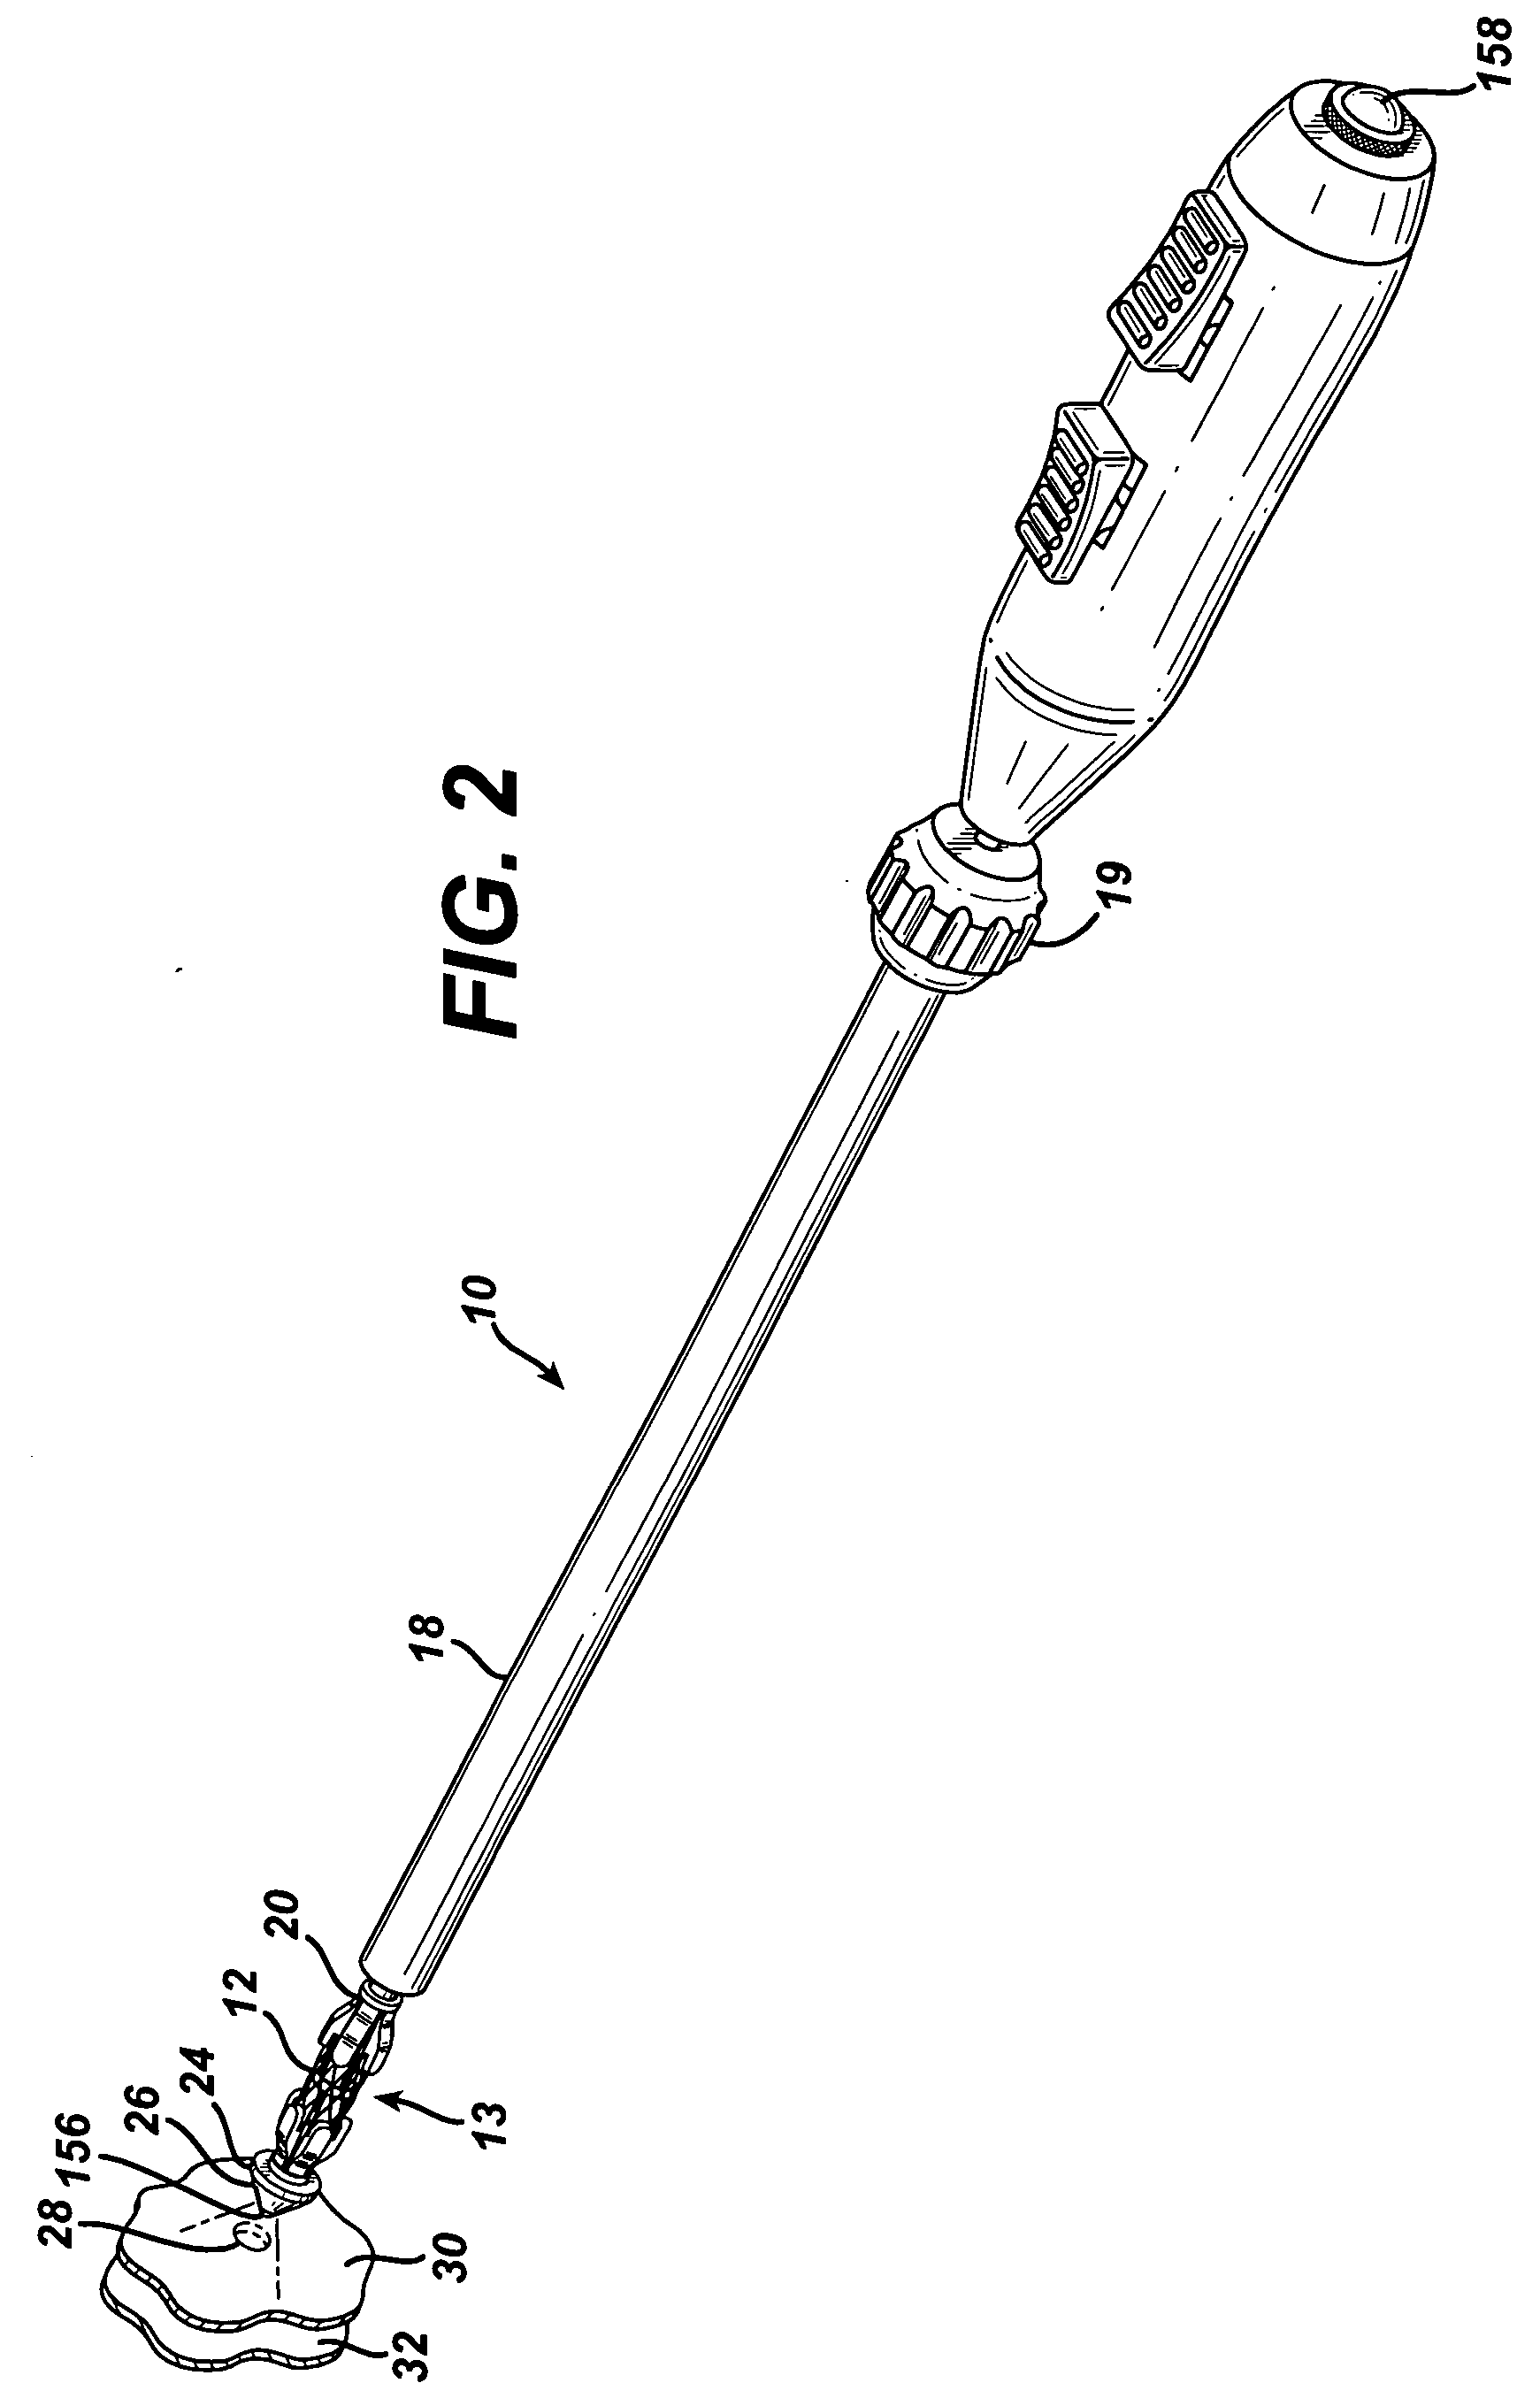 Anastomosis wire ring device